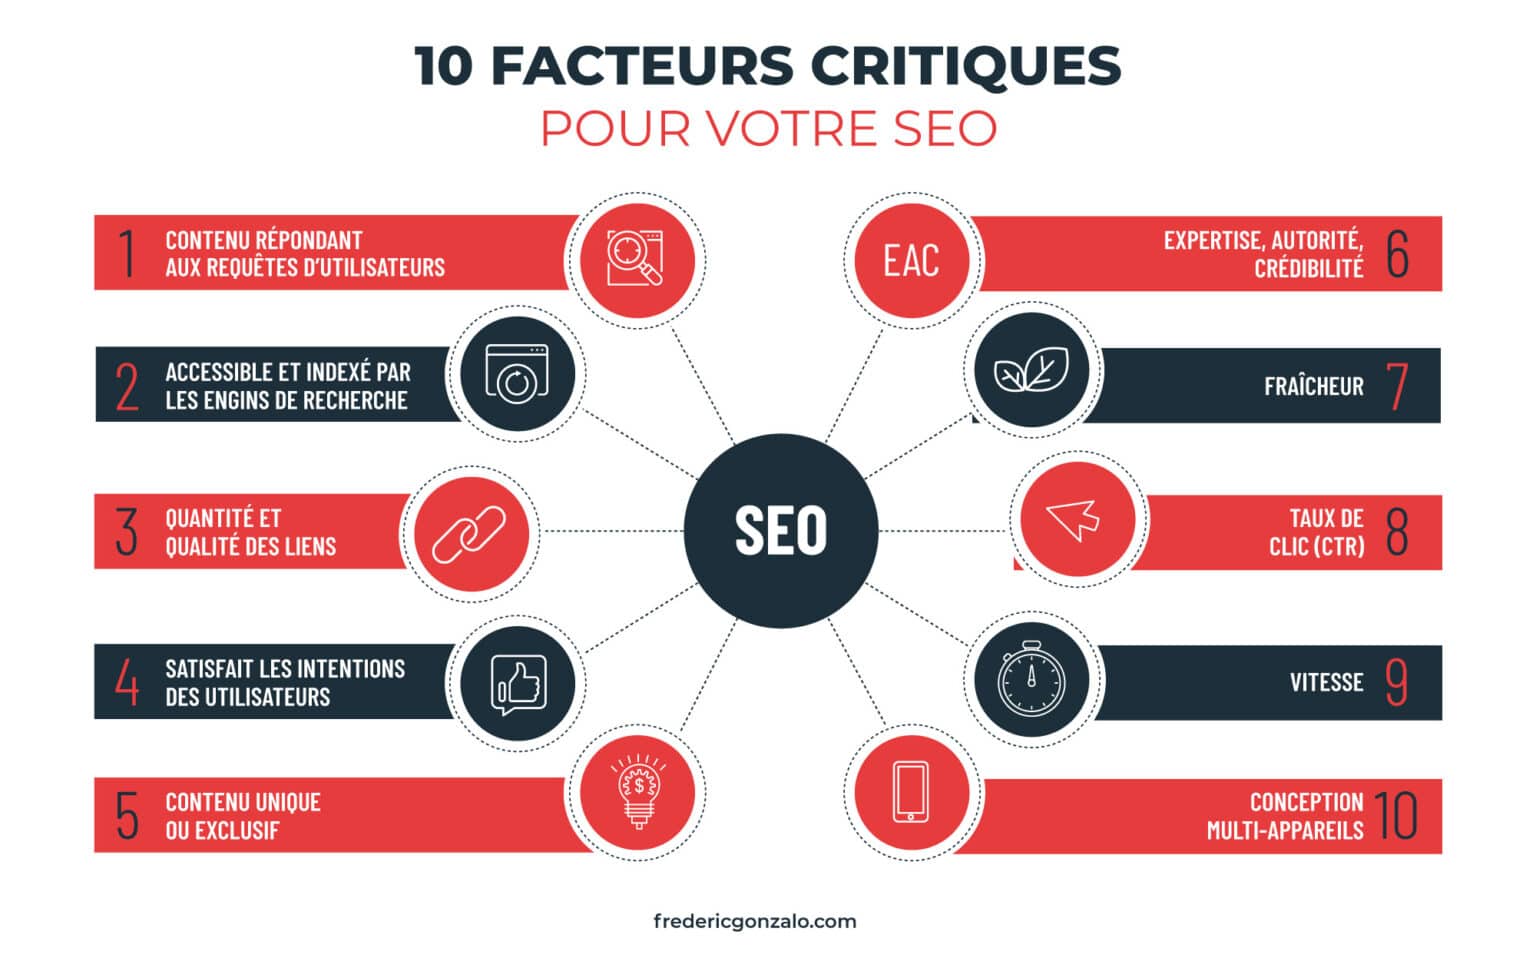 Critical factors for your SEO